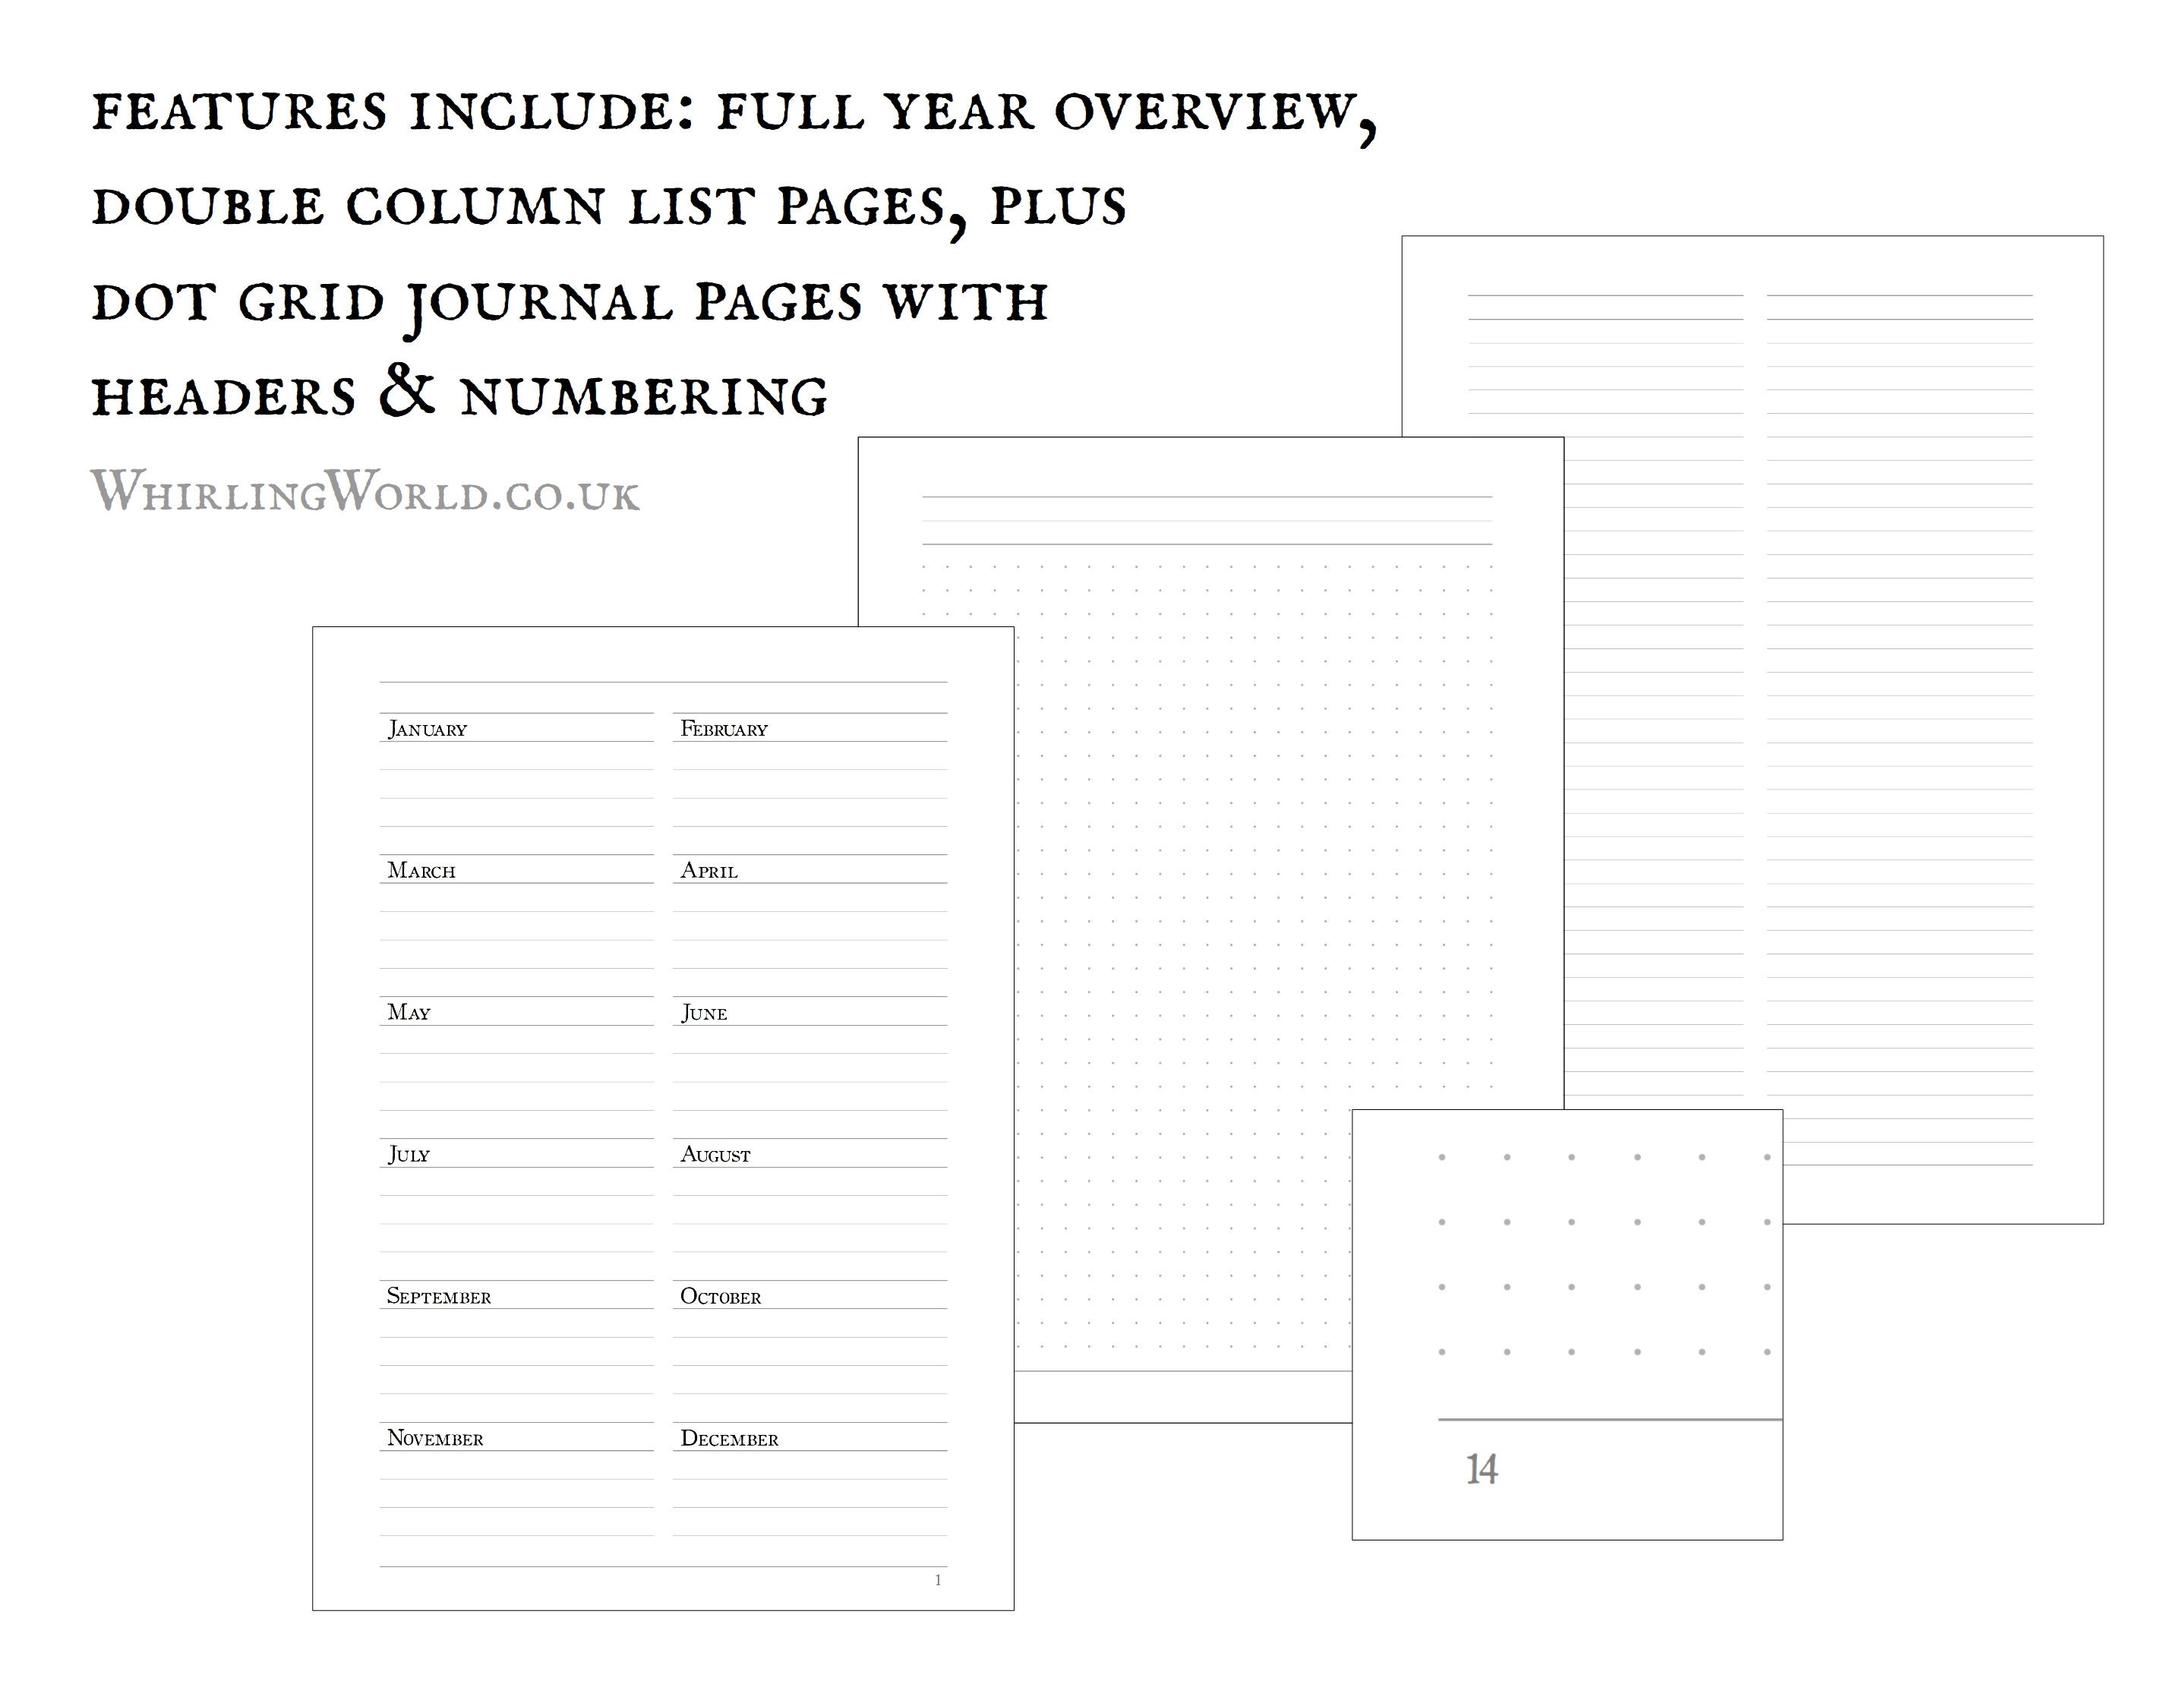 Grid, Dot or Plain: Which Journal Pages Are Best?